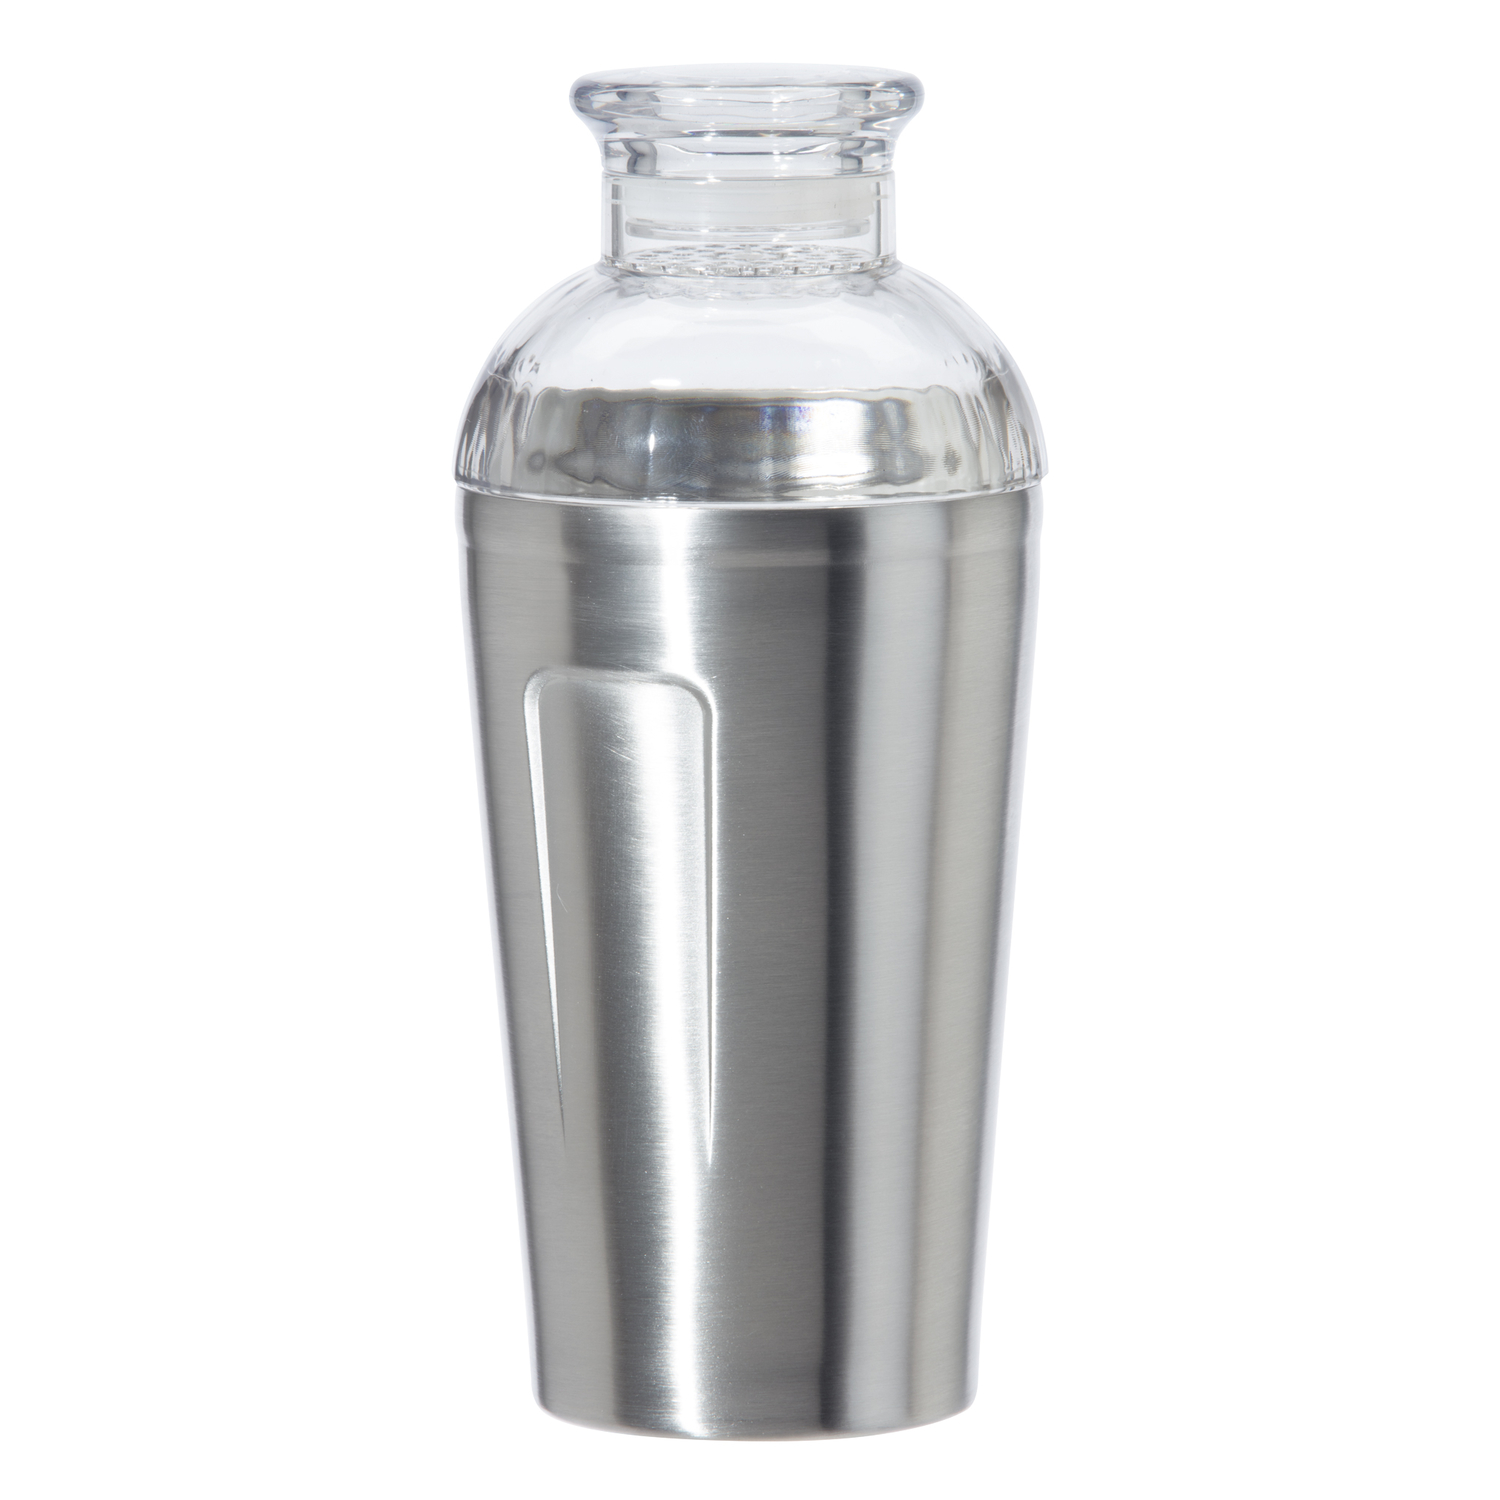 OGGI 16 oz Silver Acrylic/Stainless Steel Cocktail Shaker